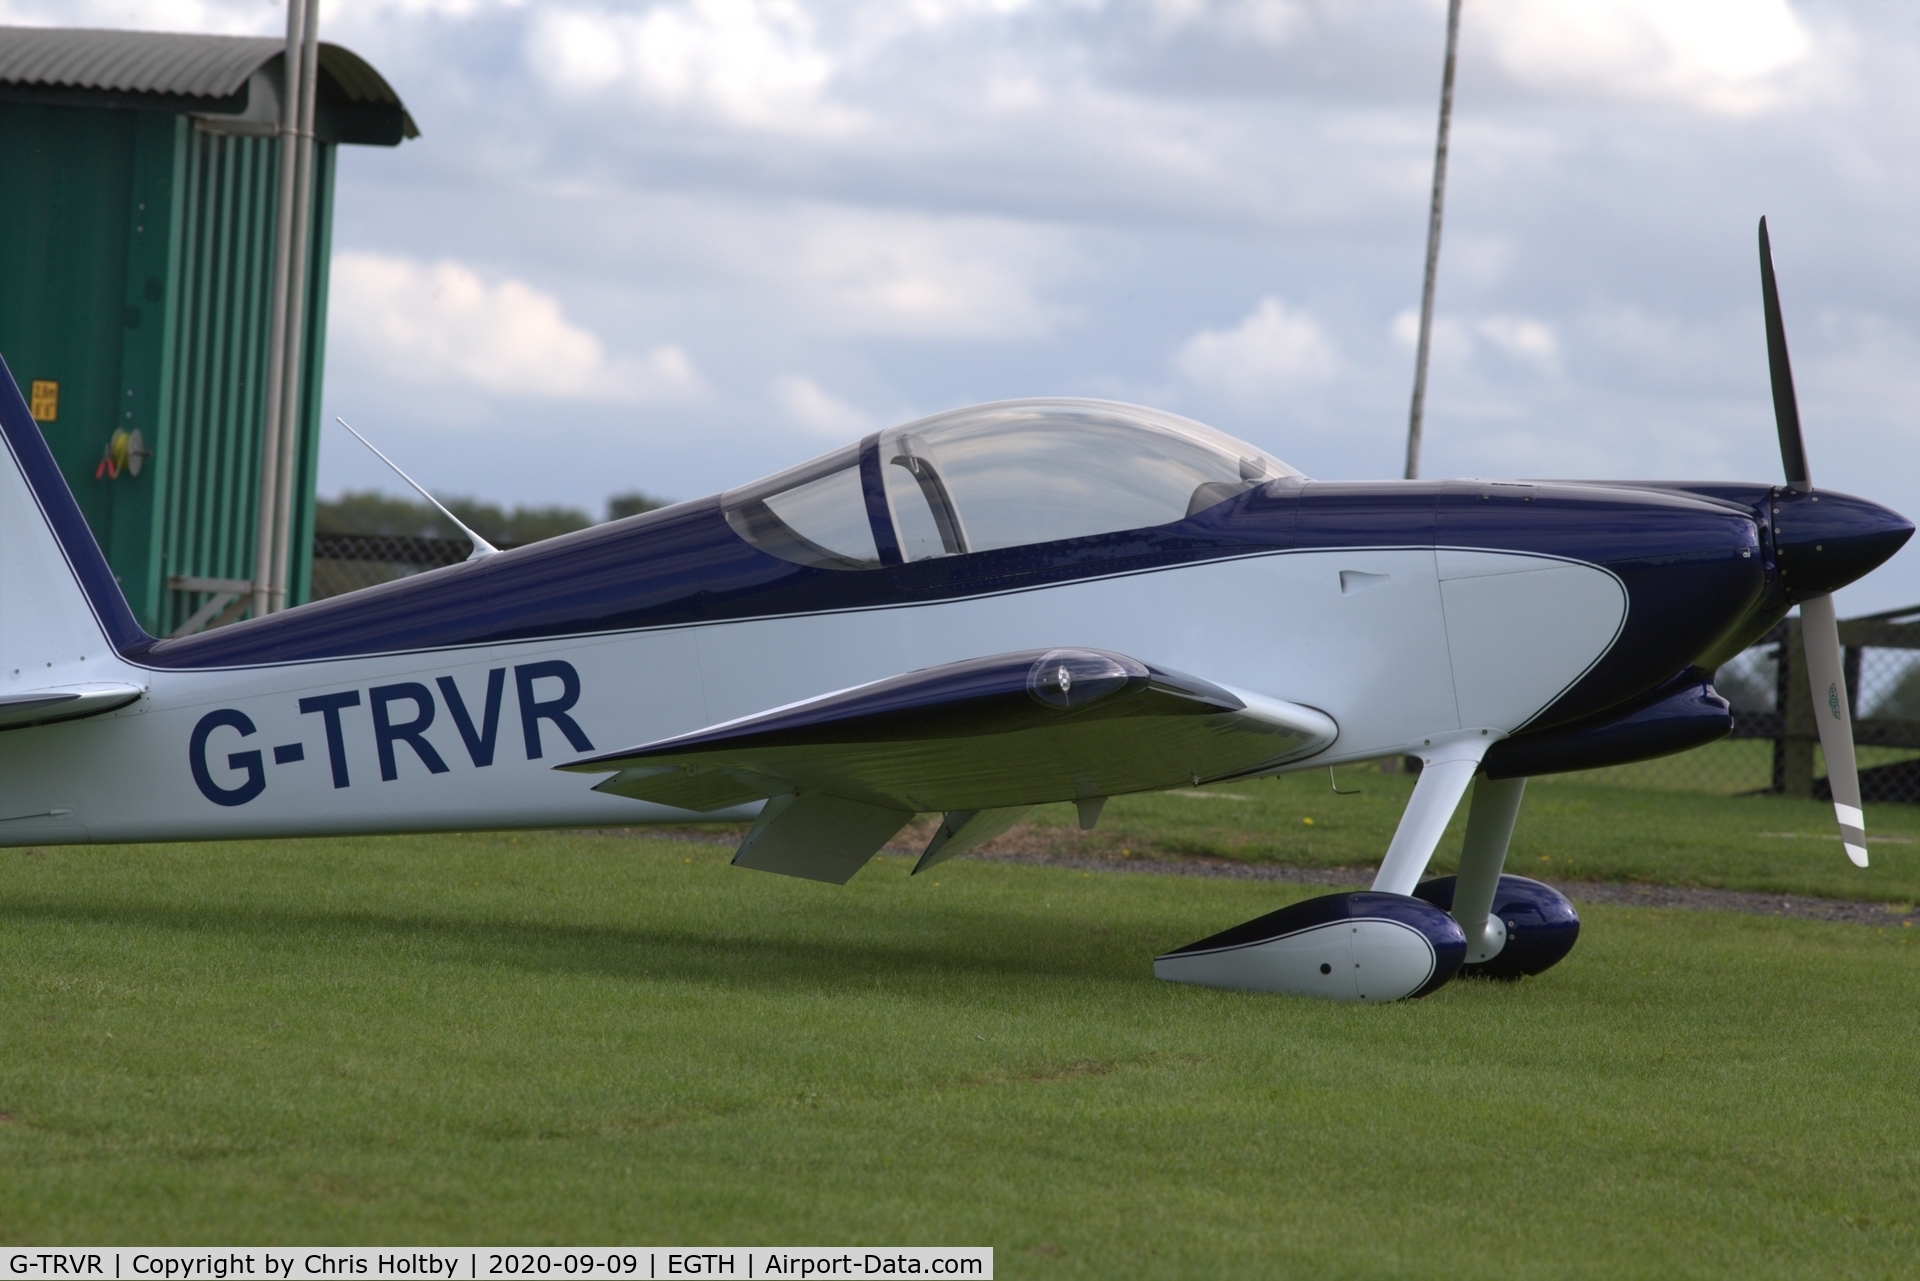 G-TRVR, 2013 Vans RV-7 C/N LAA 323-14882, Vans RV-7 sporting its finished paint job at Old Warden